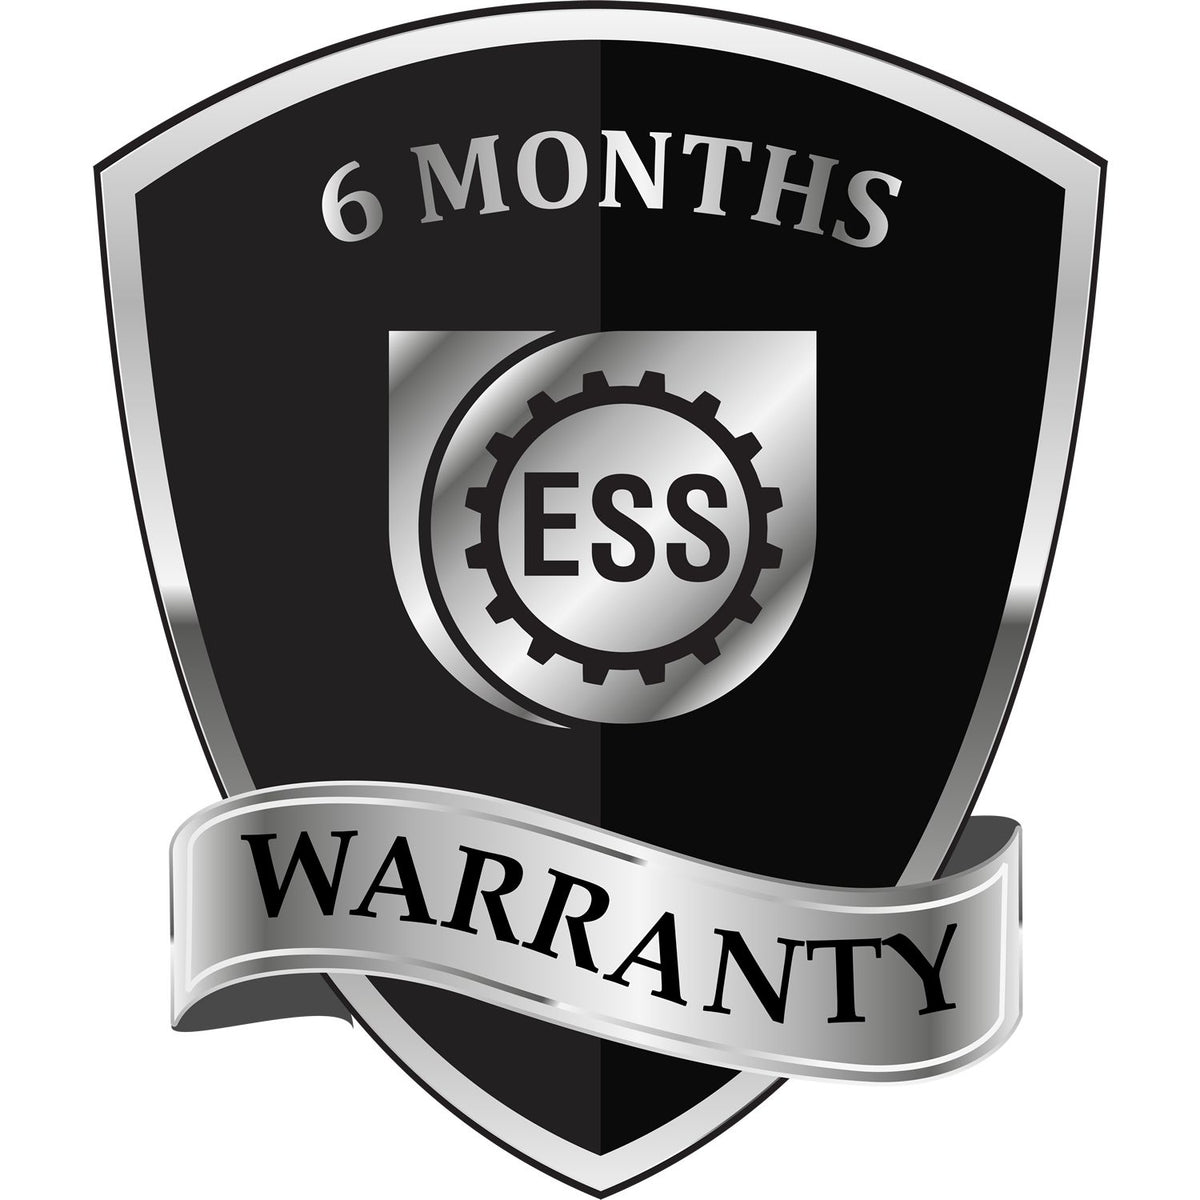 A badge or emblem showing a warranty icon for the Slim Pre-Inked Alaska Professional Engineer Seal Stamp